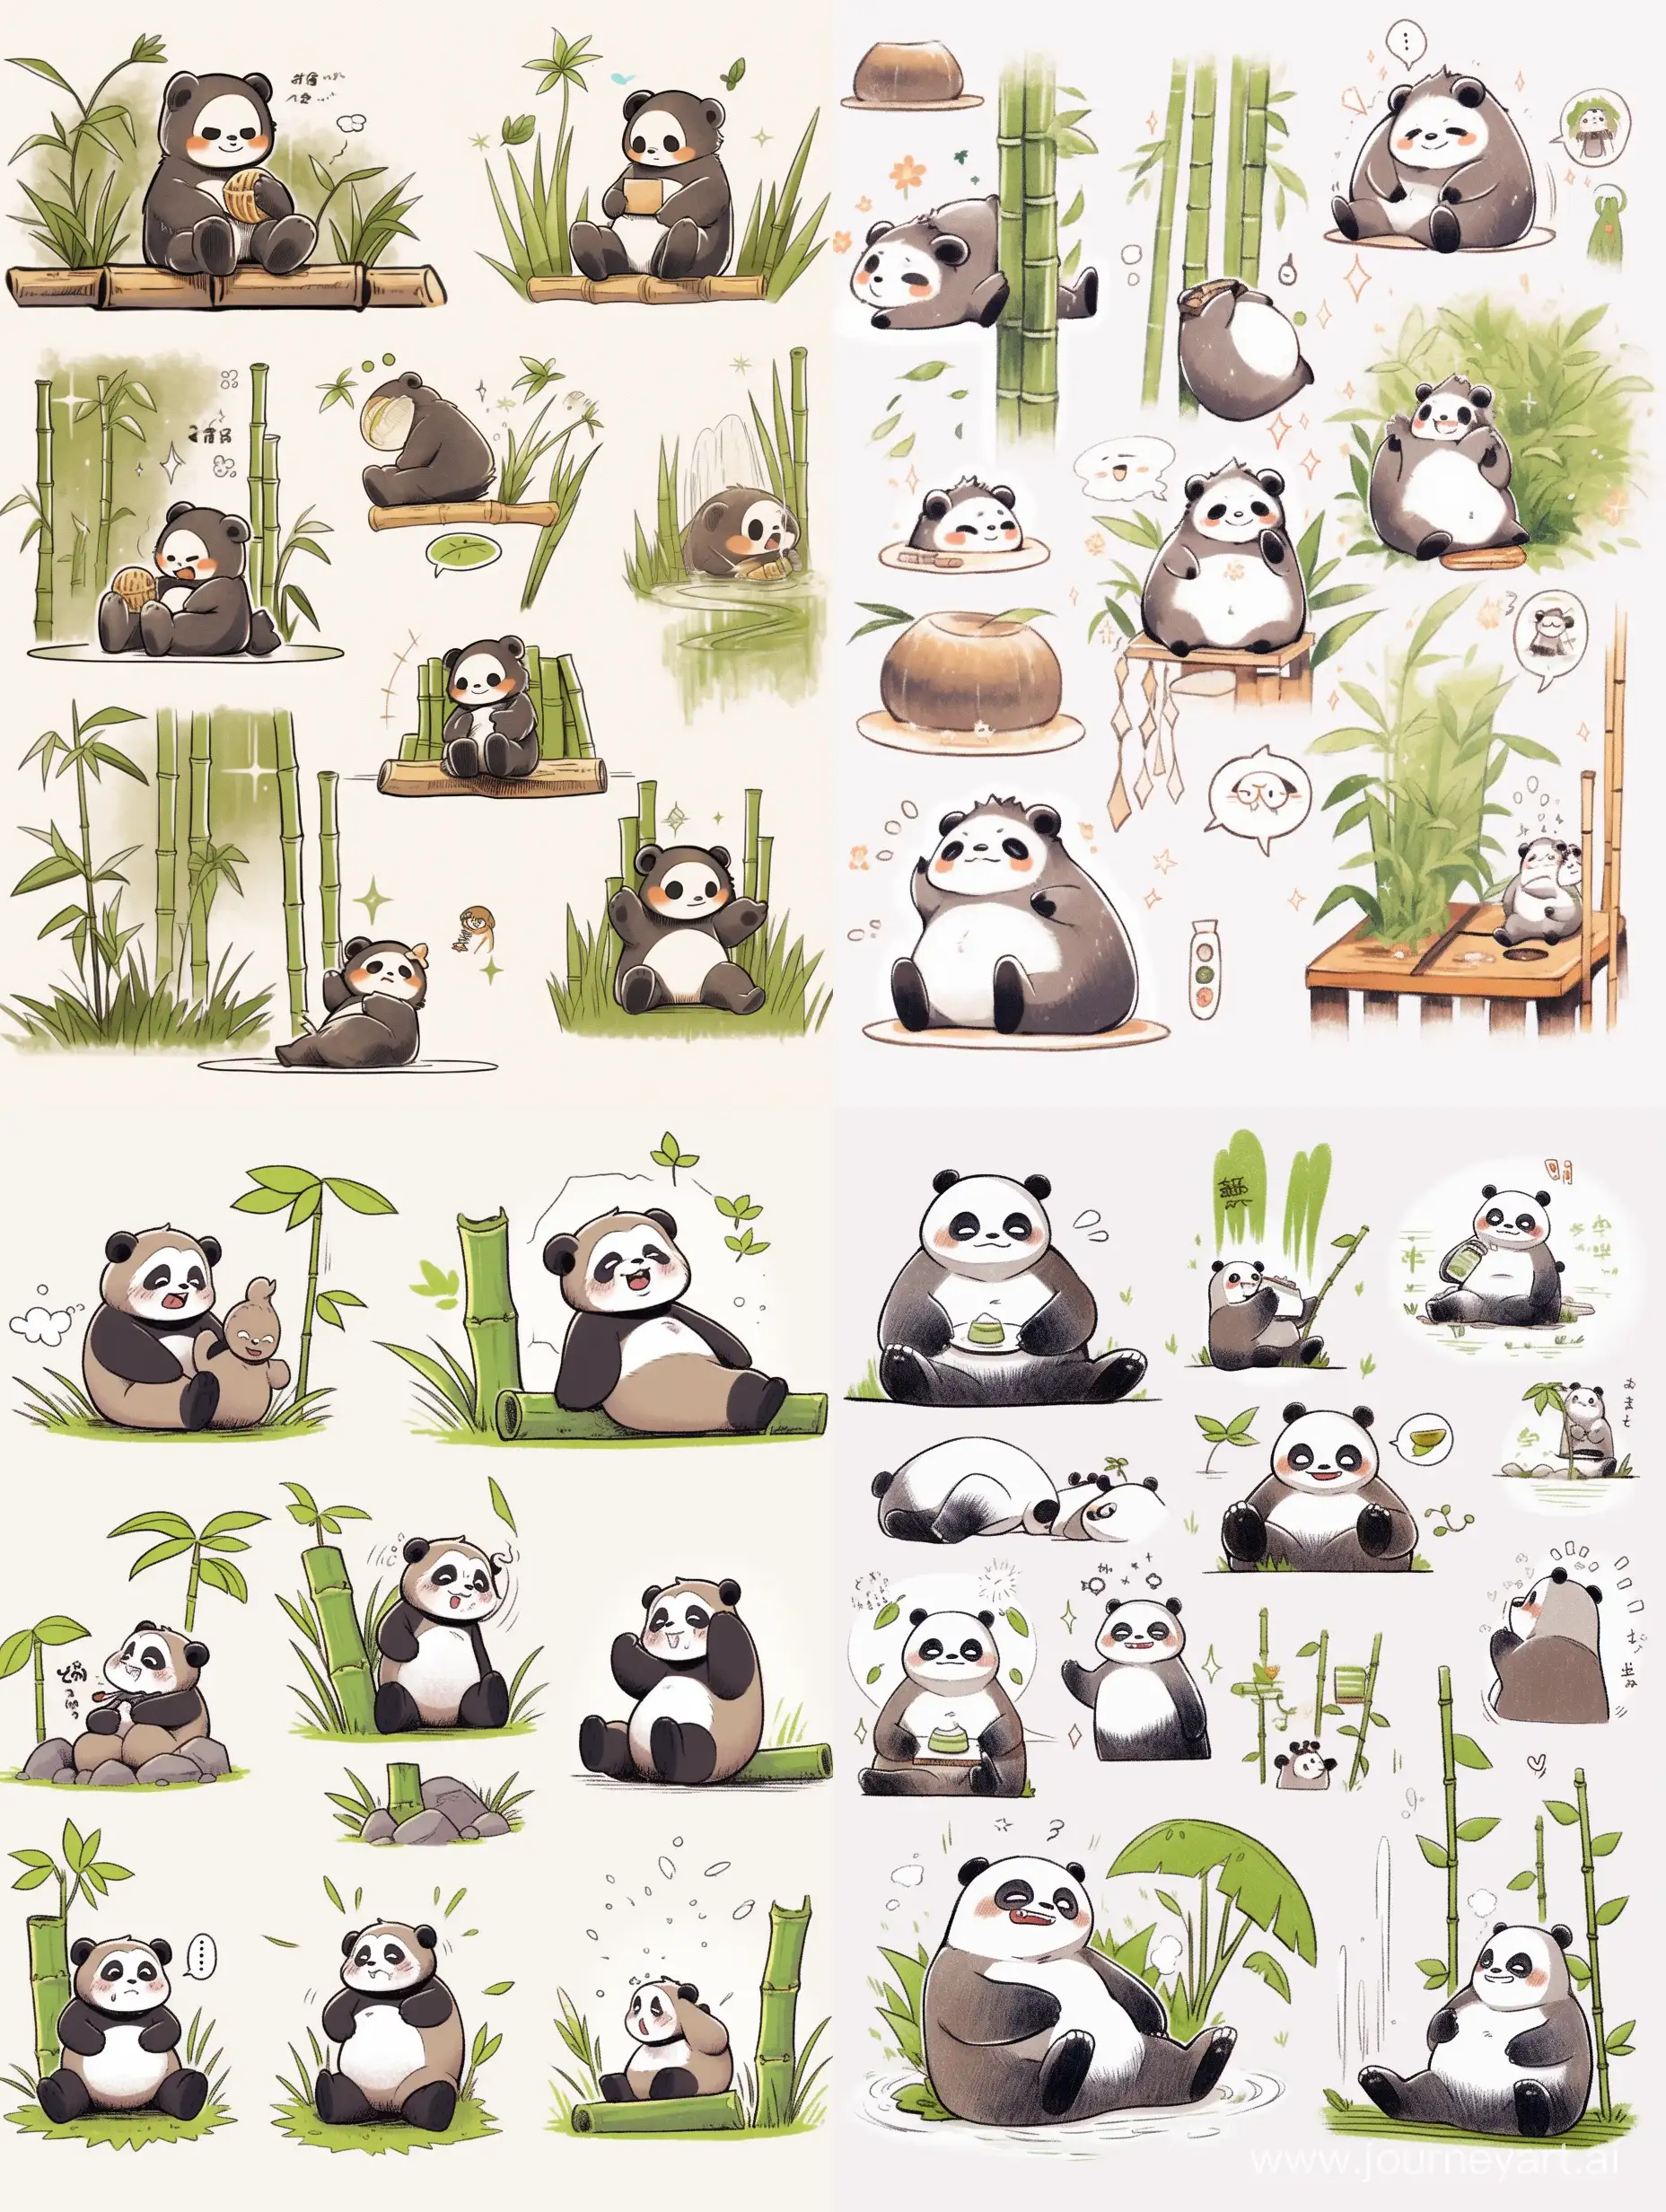 Adorable-Panda-Emotions-Playful-Expressions-in-Q-Version-Sticker-Art